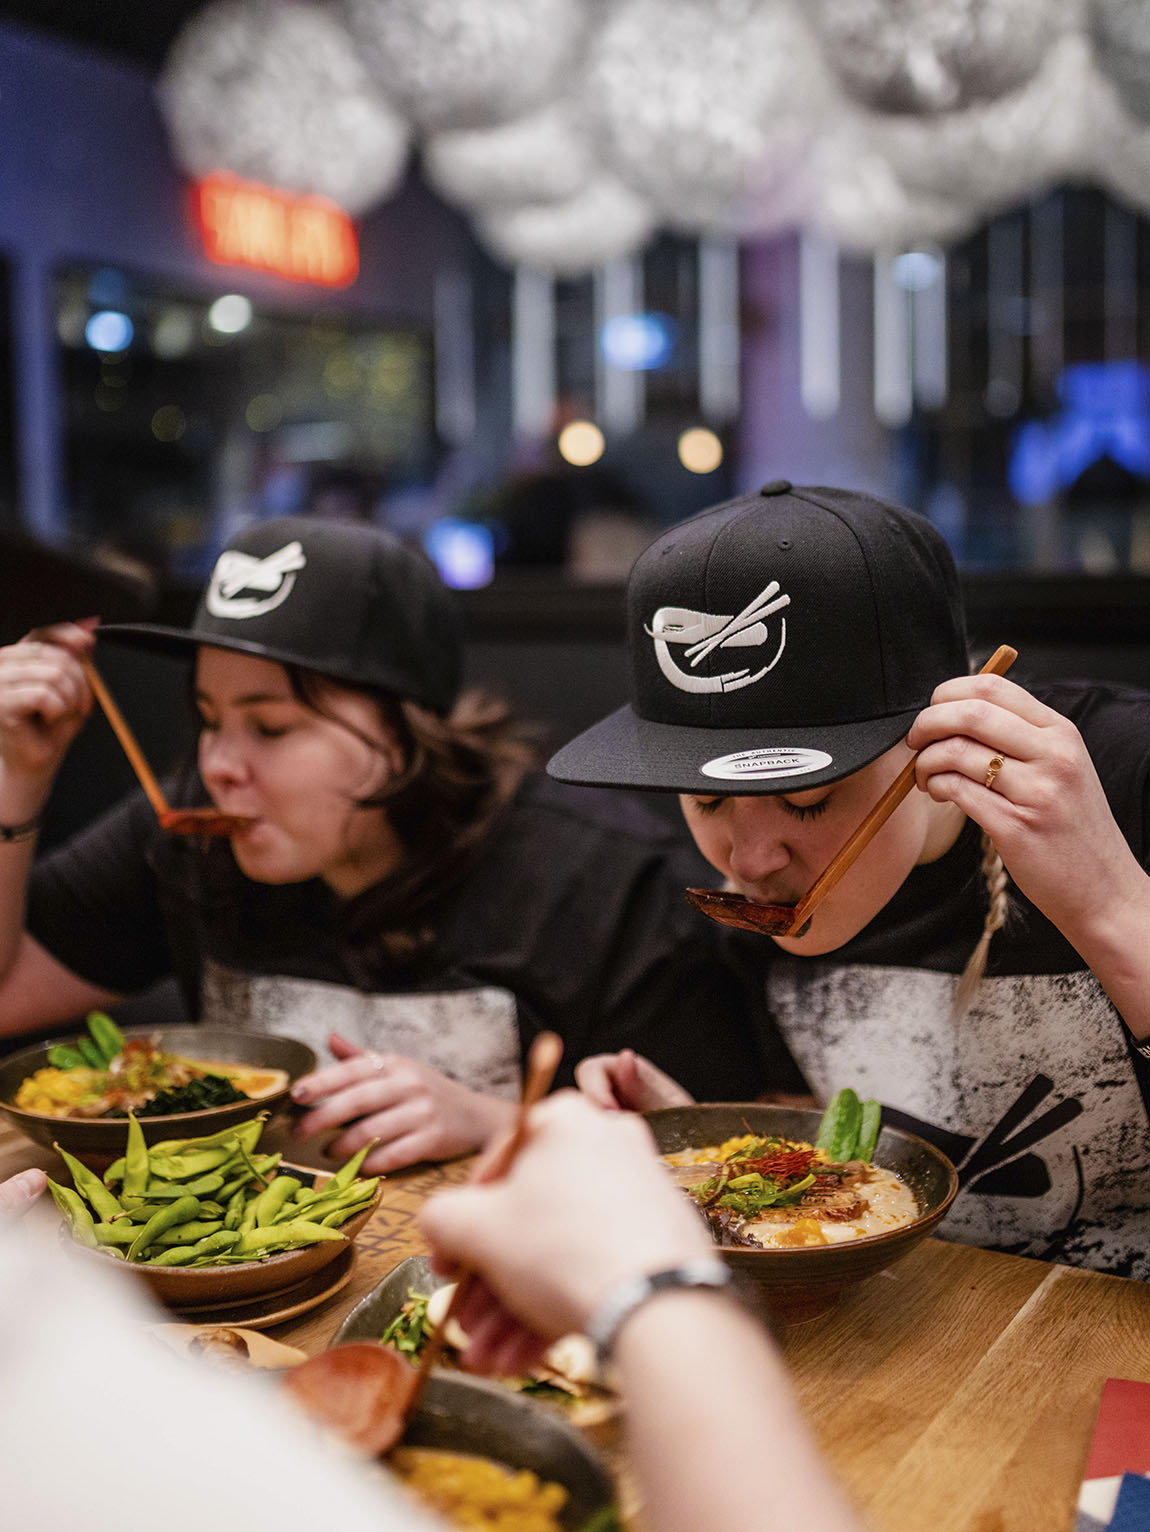 Momo Toko: Japanese ramen served with a side of excellent customer service